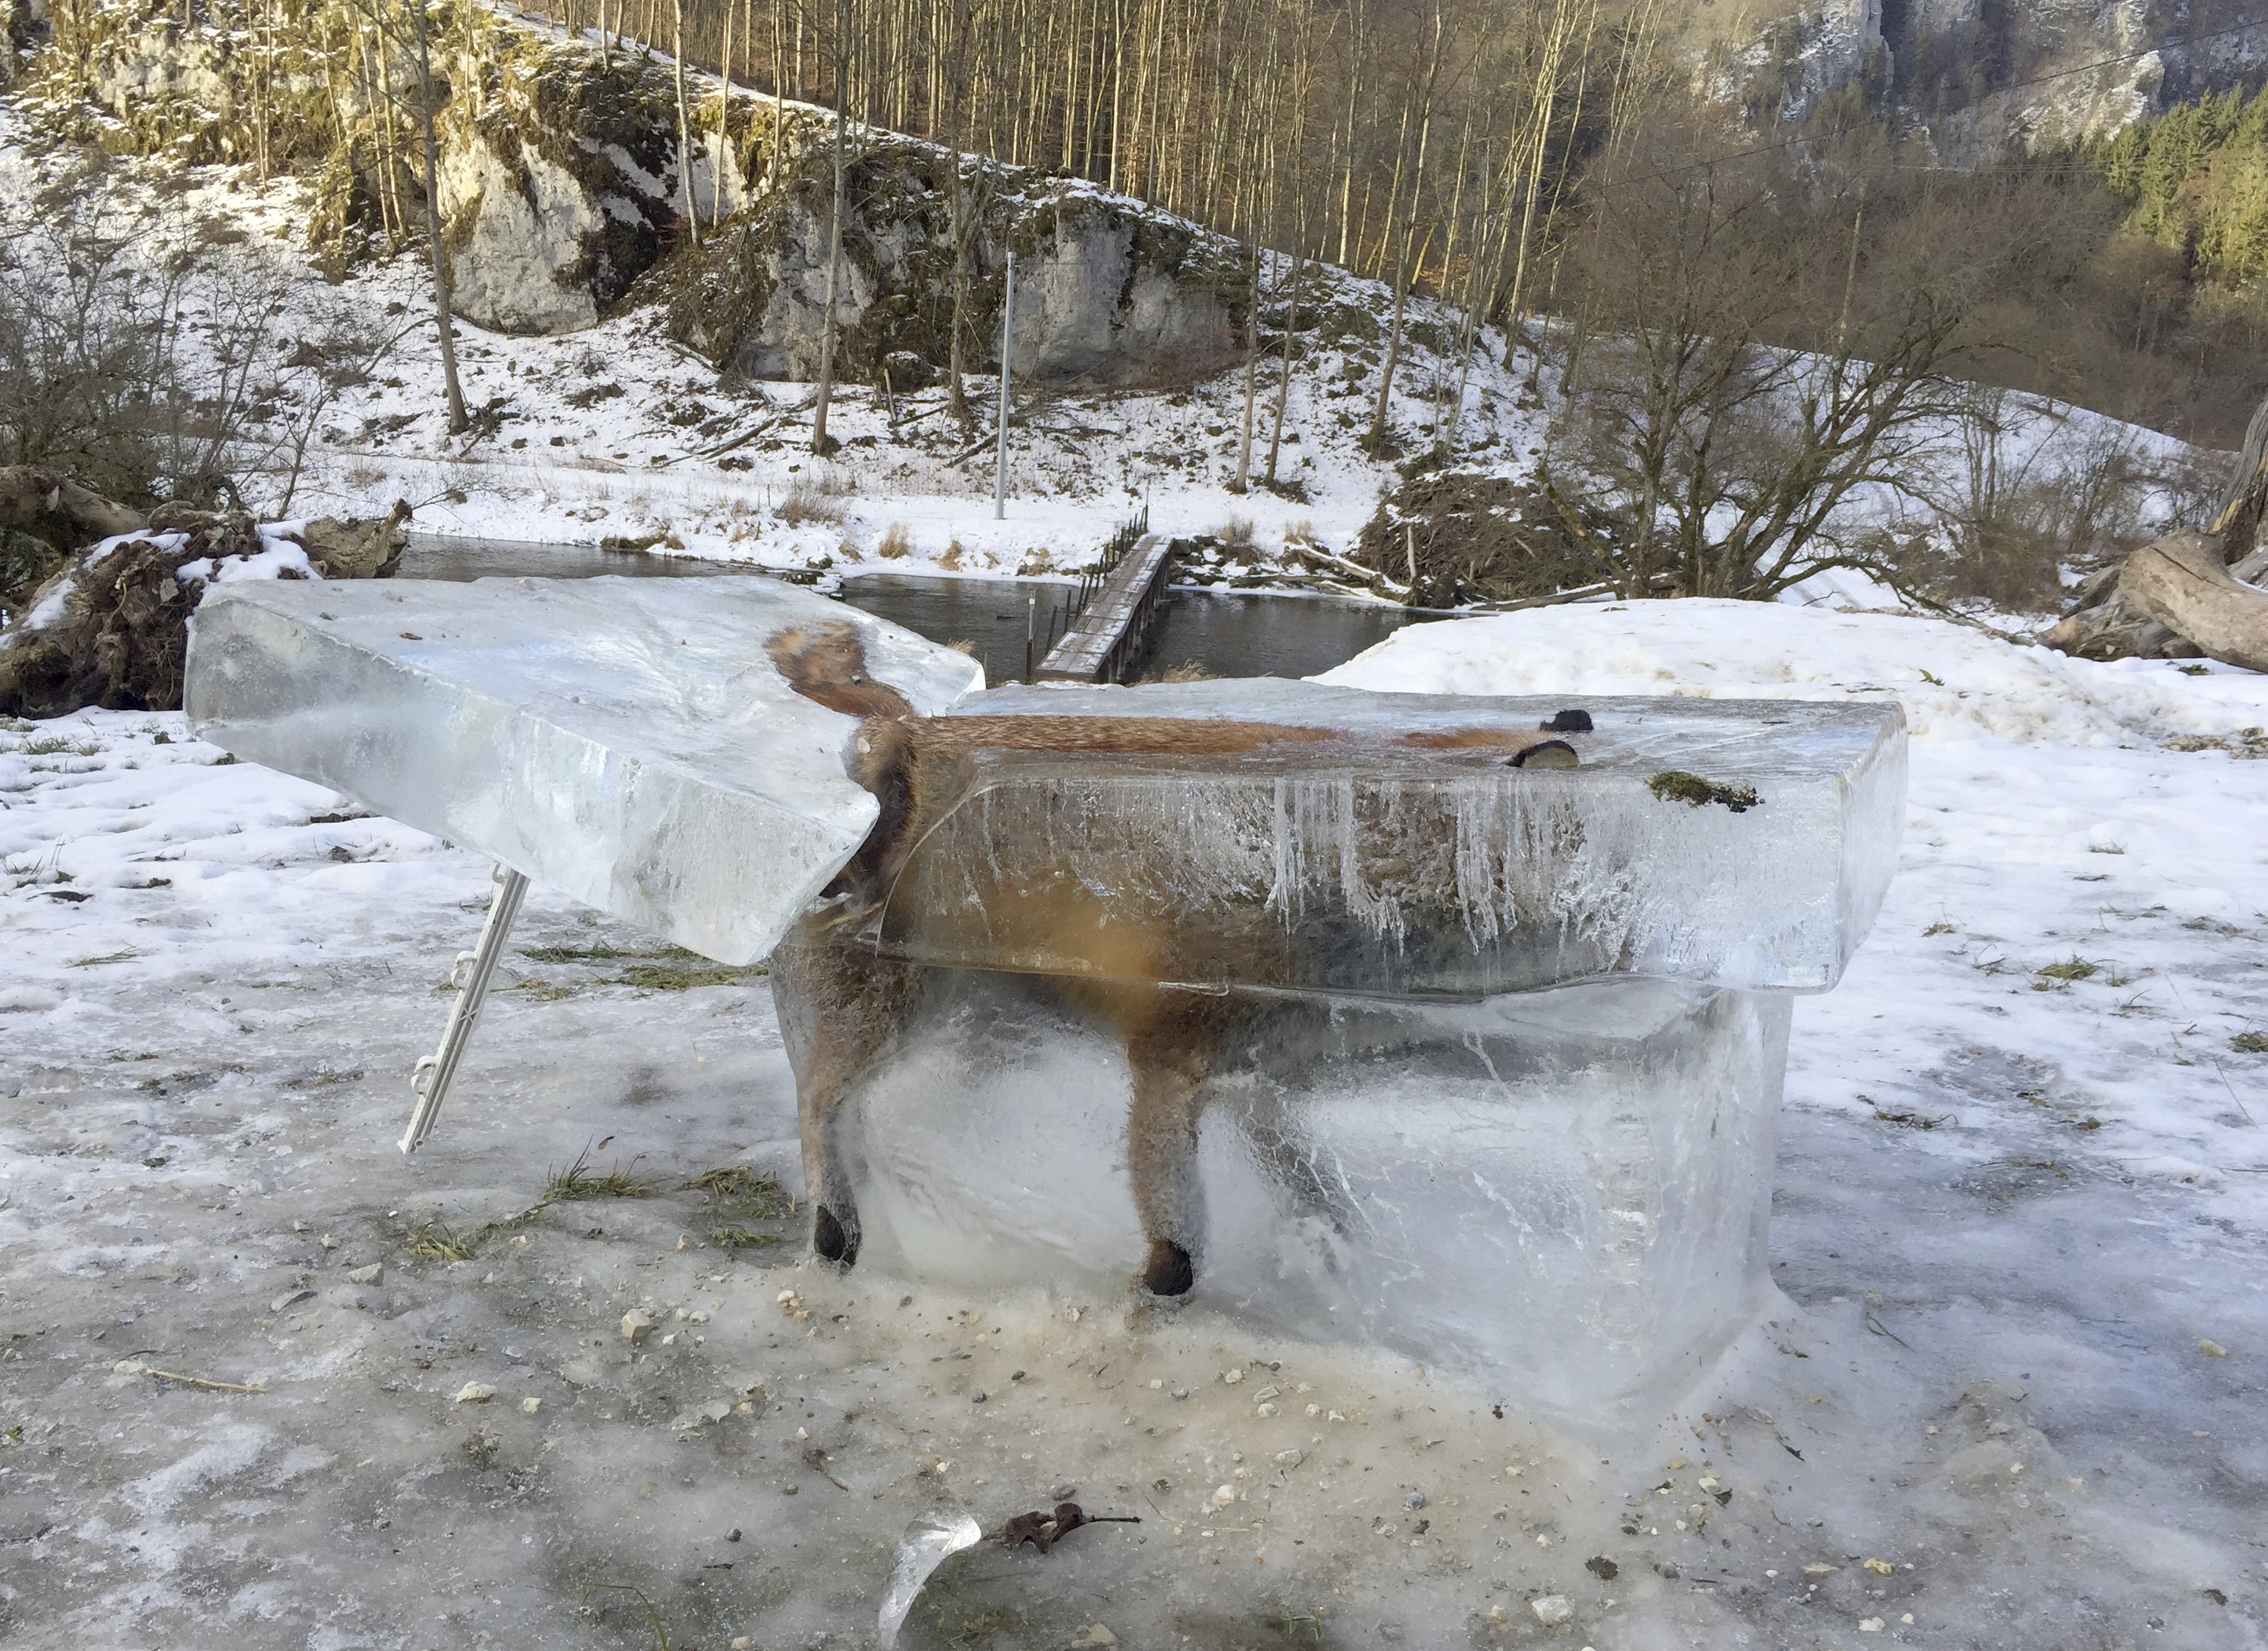 A block of ice with a frozen fox can be seen in Fridingen, Germany, 13 January 2017. The animal broke through the thin ice on the Donau river and drowned on the 09.01.17. Photo by: Johannes Stehle/picture-alliance/dpa/AP Images